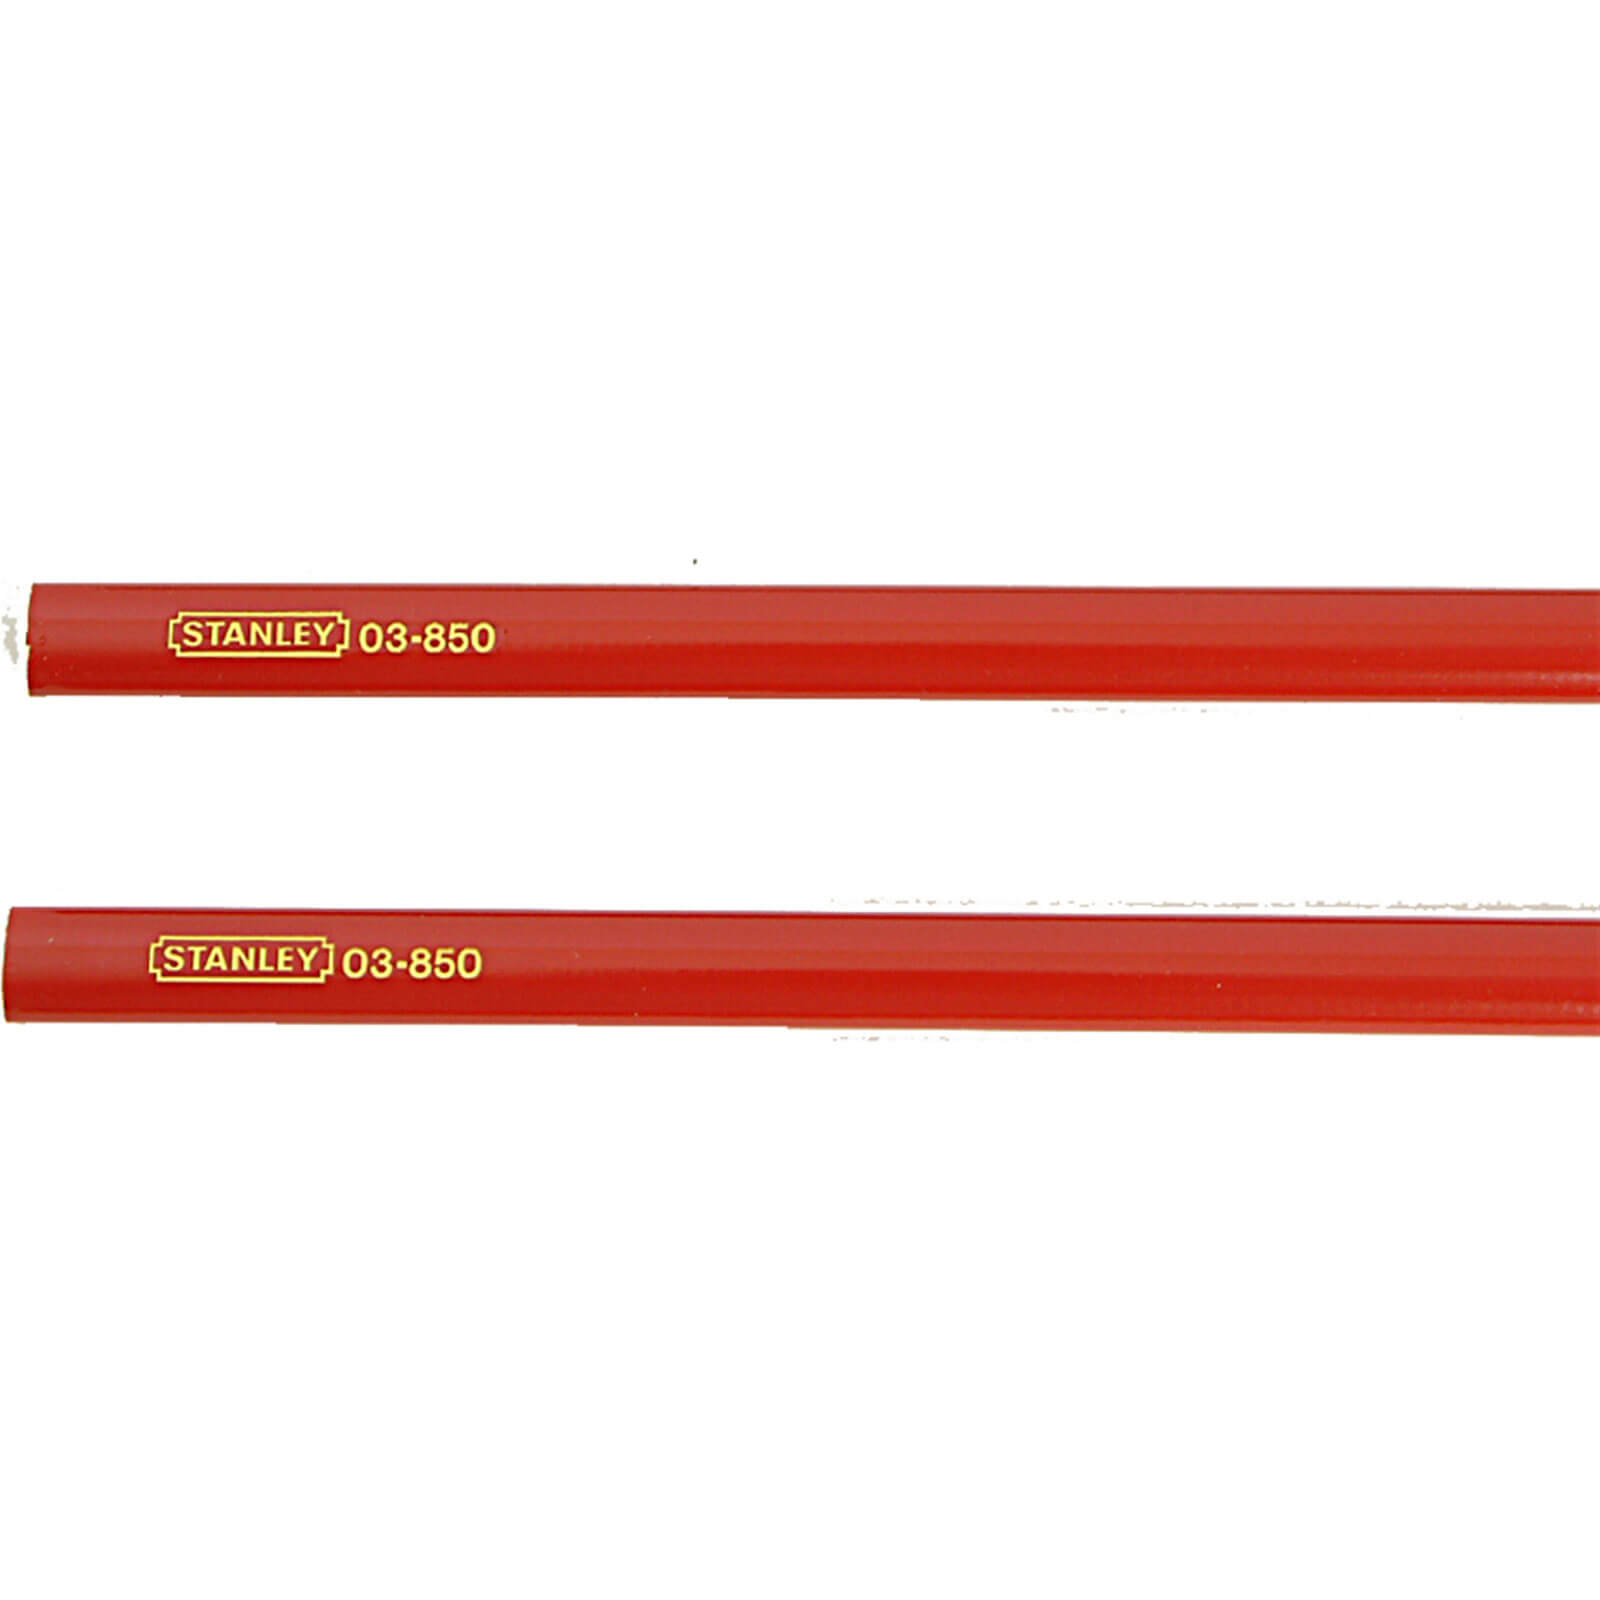 Image of Stanley Carpenters Pencils Pack of 2